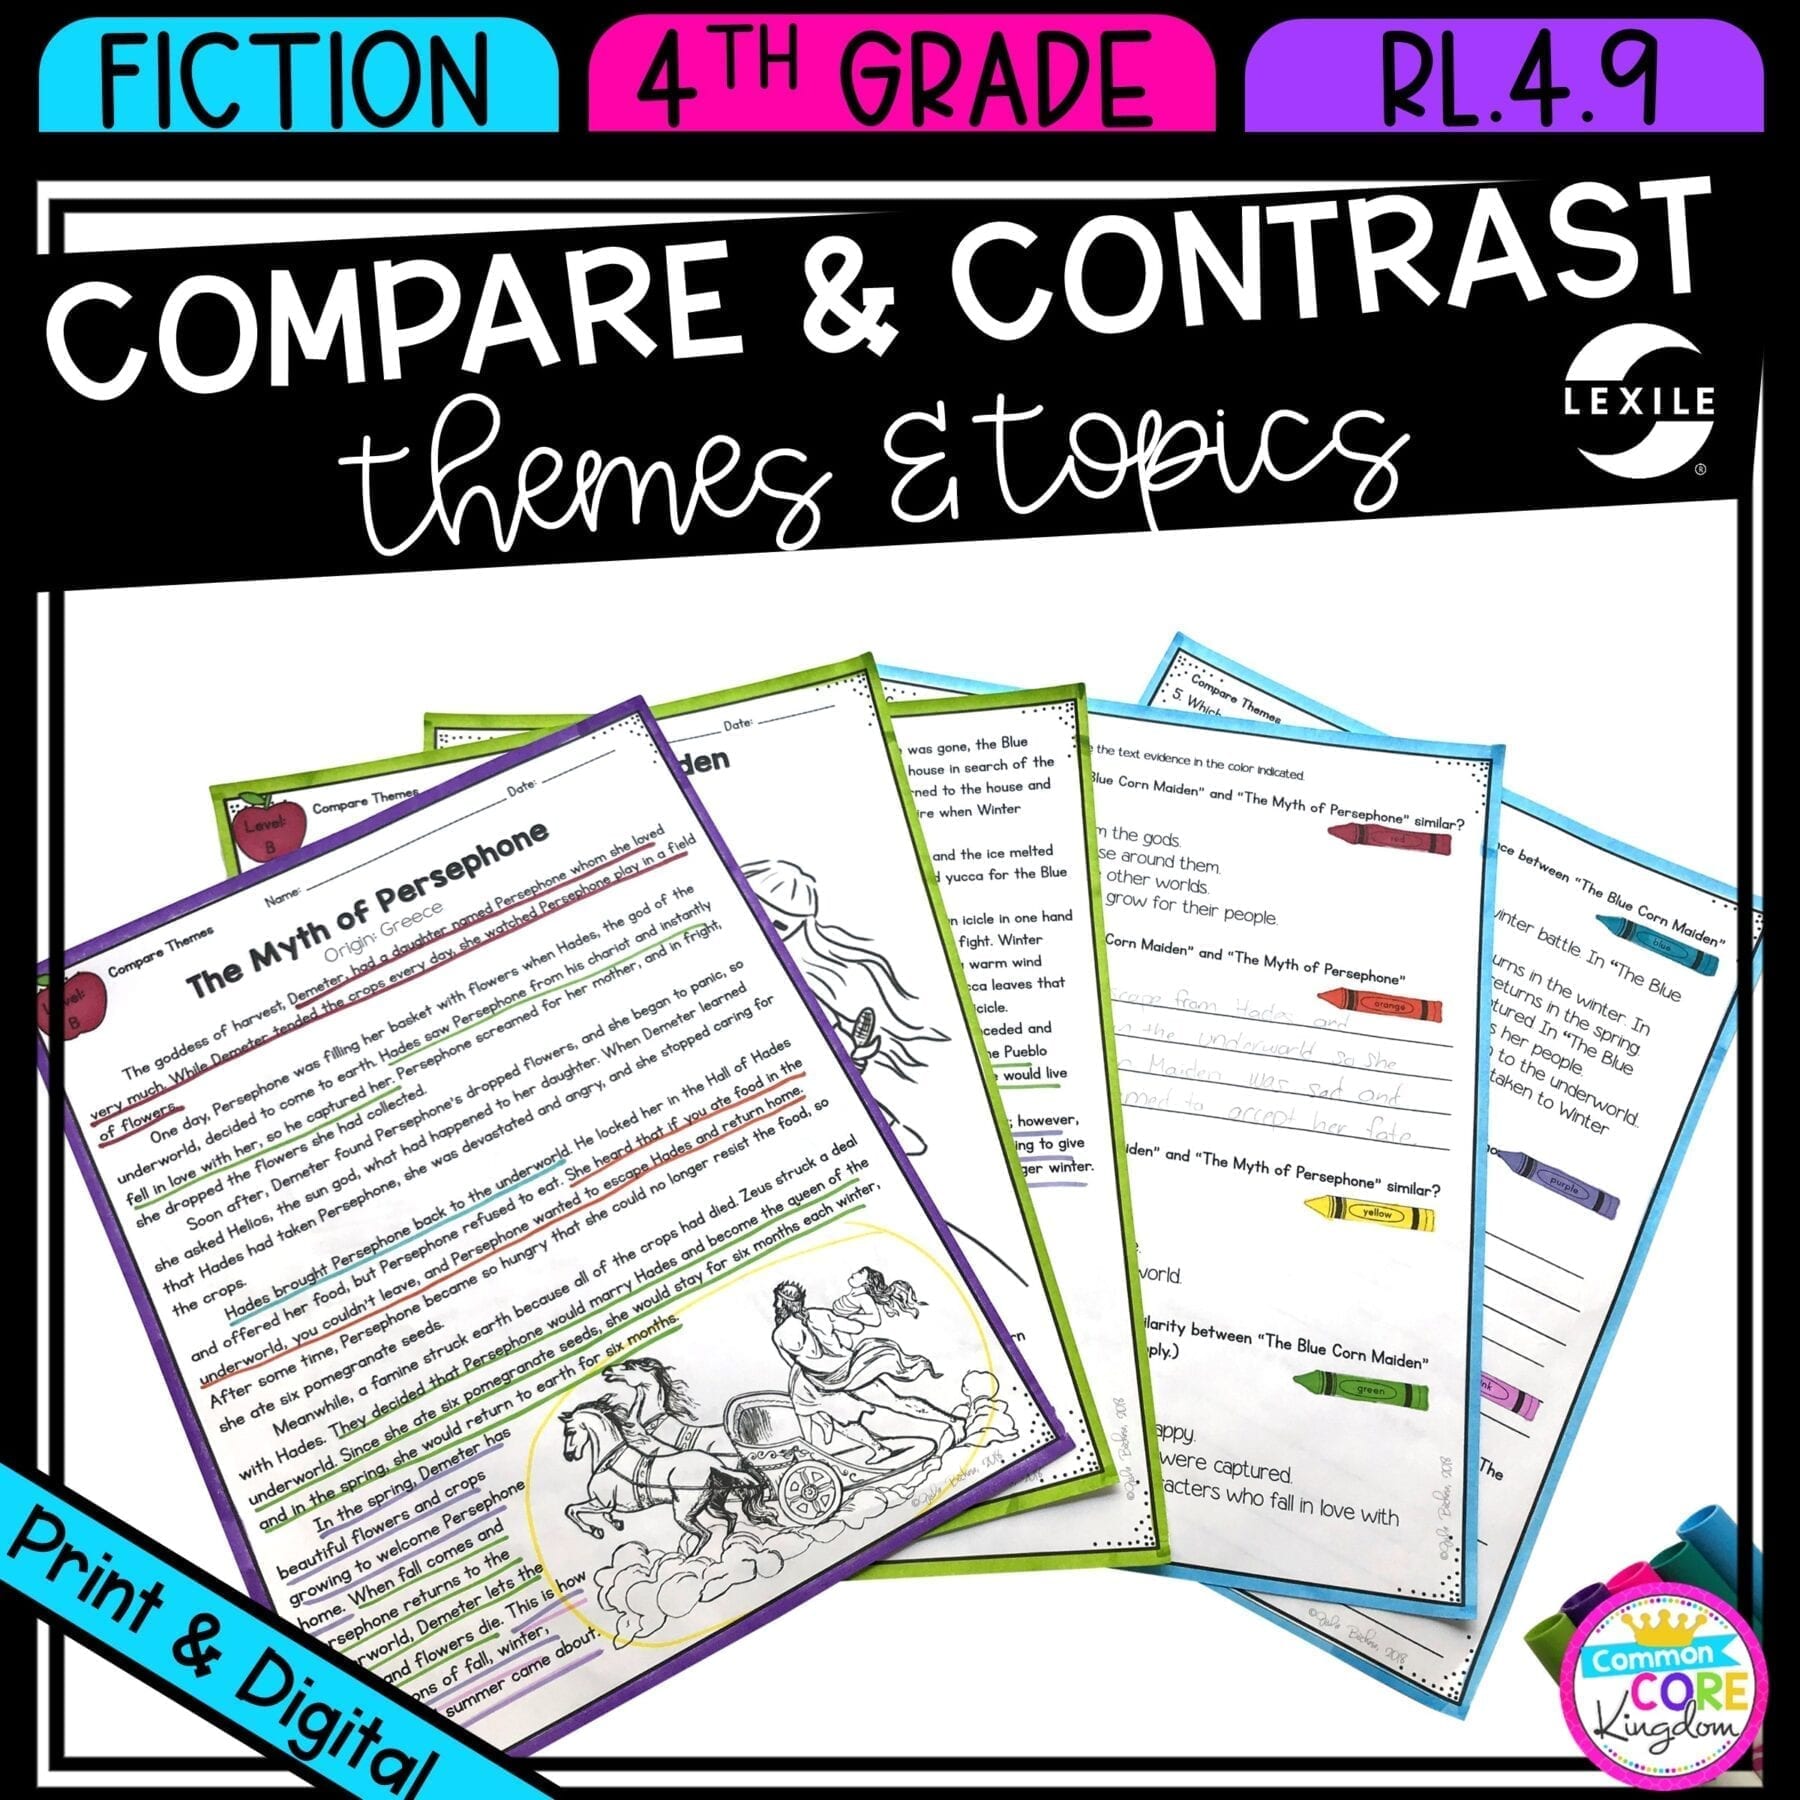 Compare and Contrast Themes in Folktales & Myths for 4th grade cover showing printable and digital worksheets